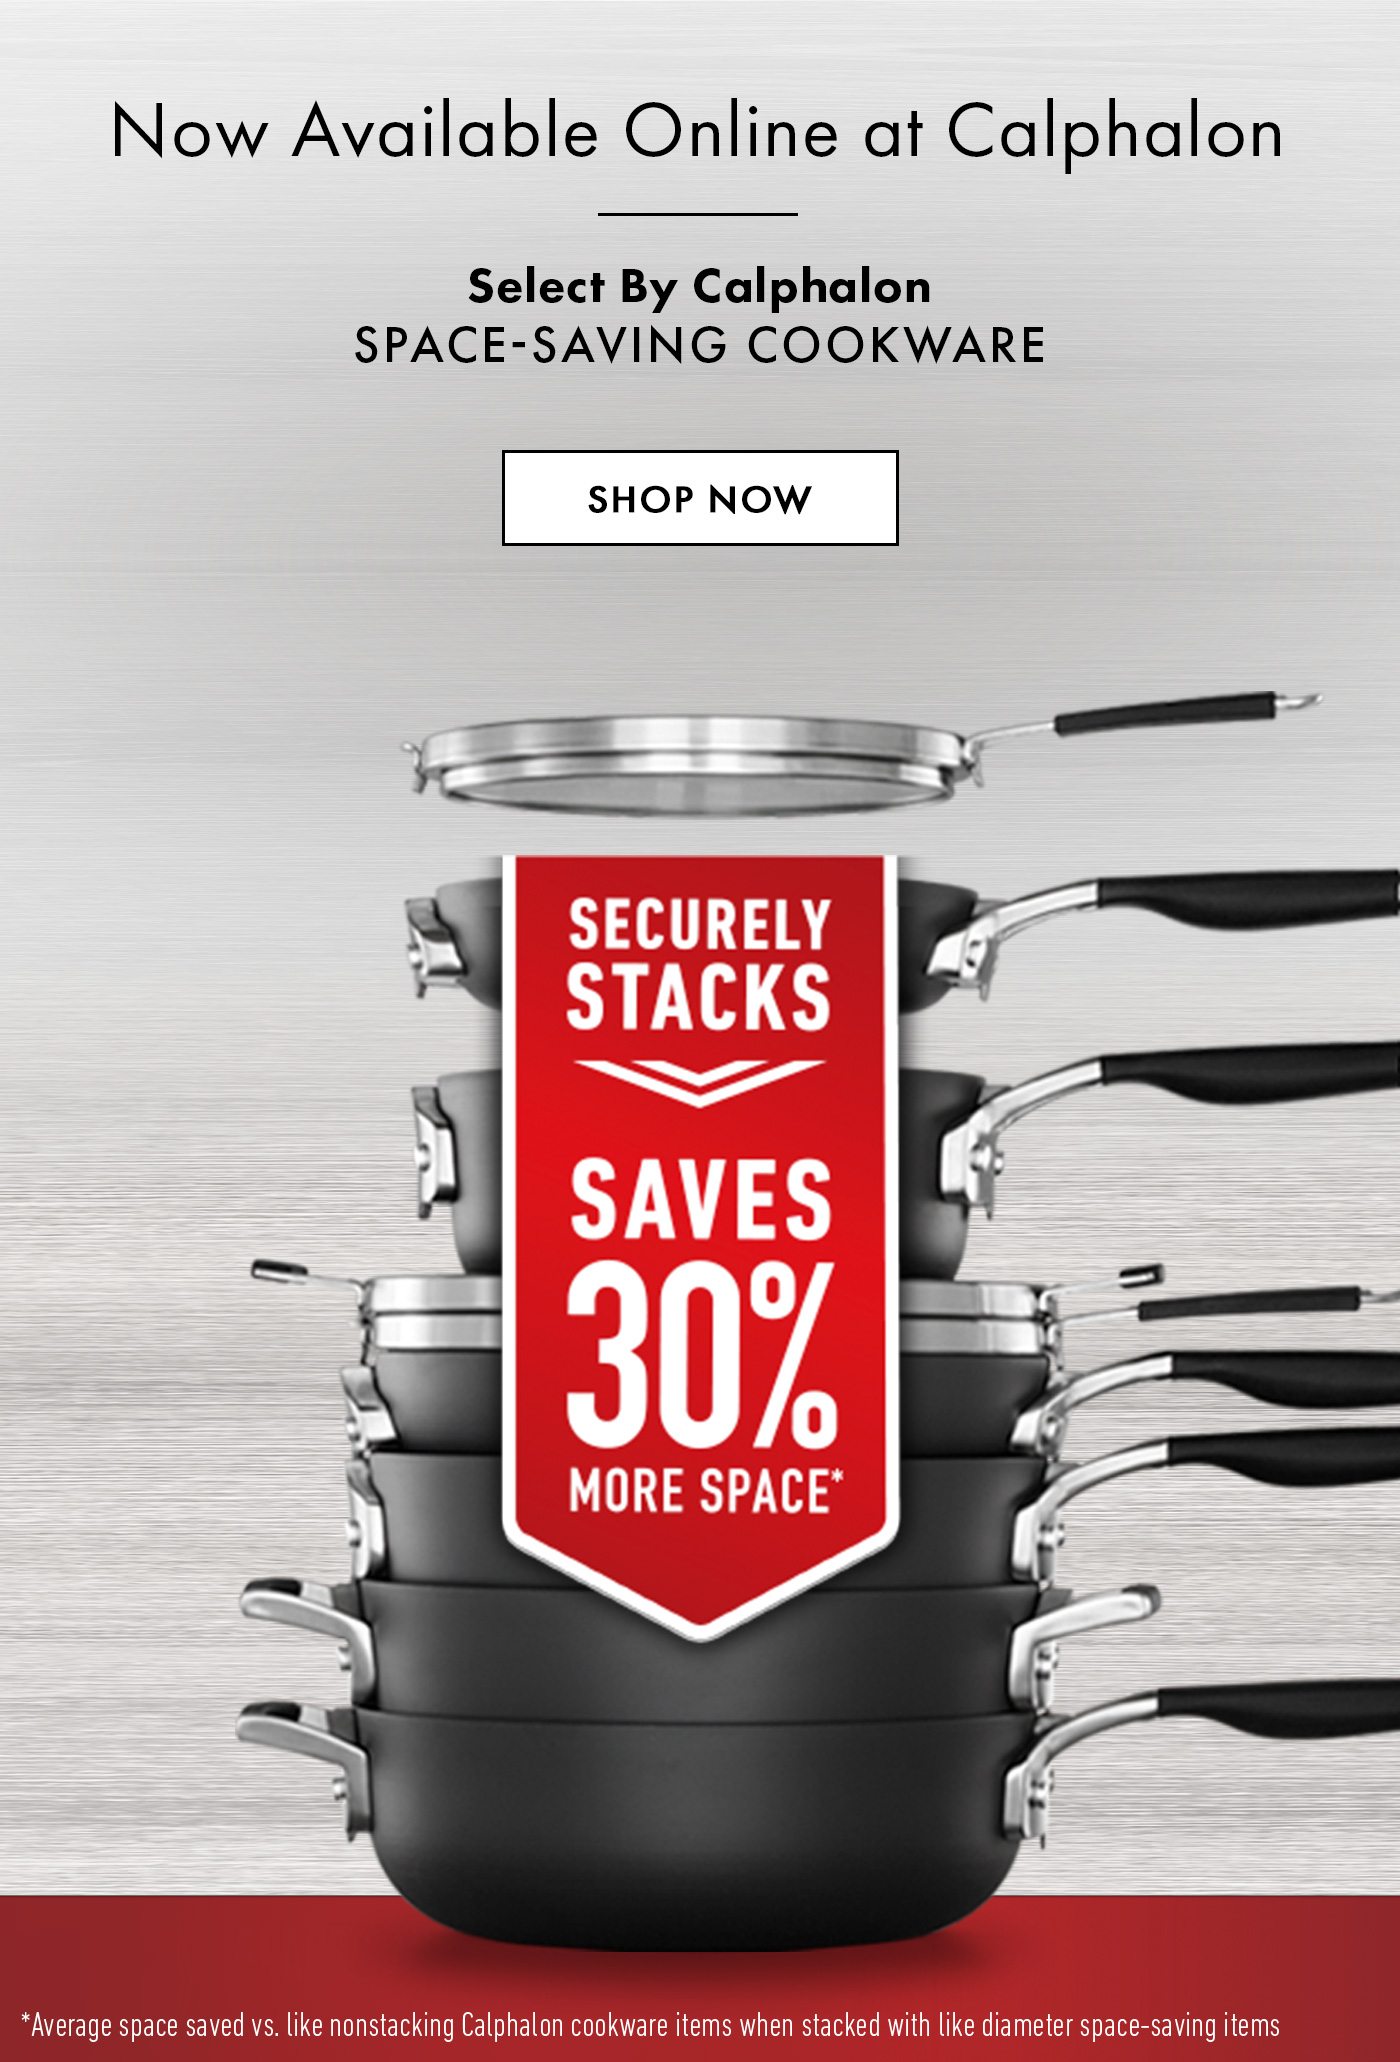 Now Available Online at Calphalon. Select By Calphalon SPACE-SAVING COOKWARE. Shop Now